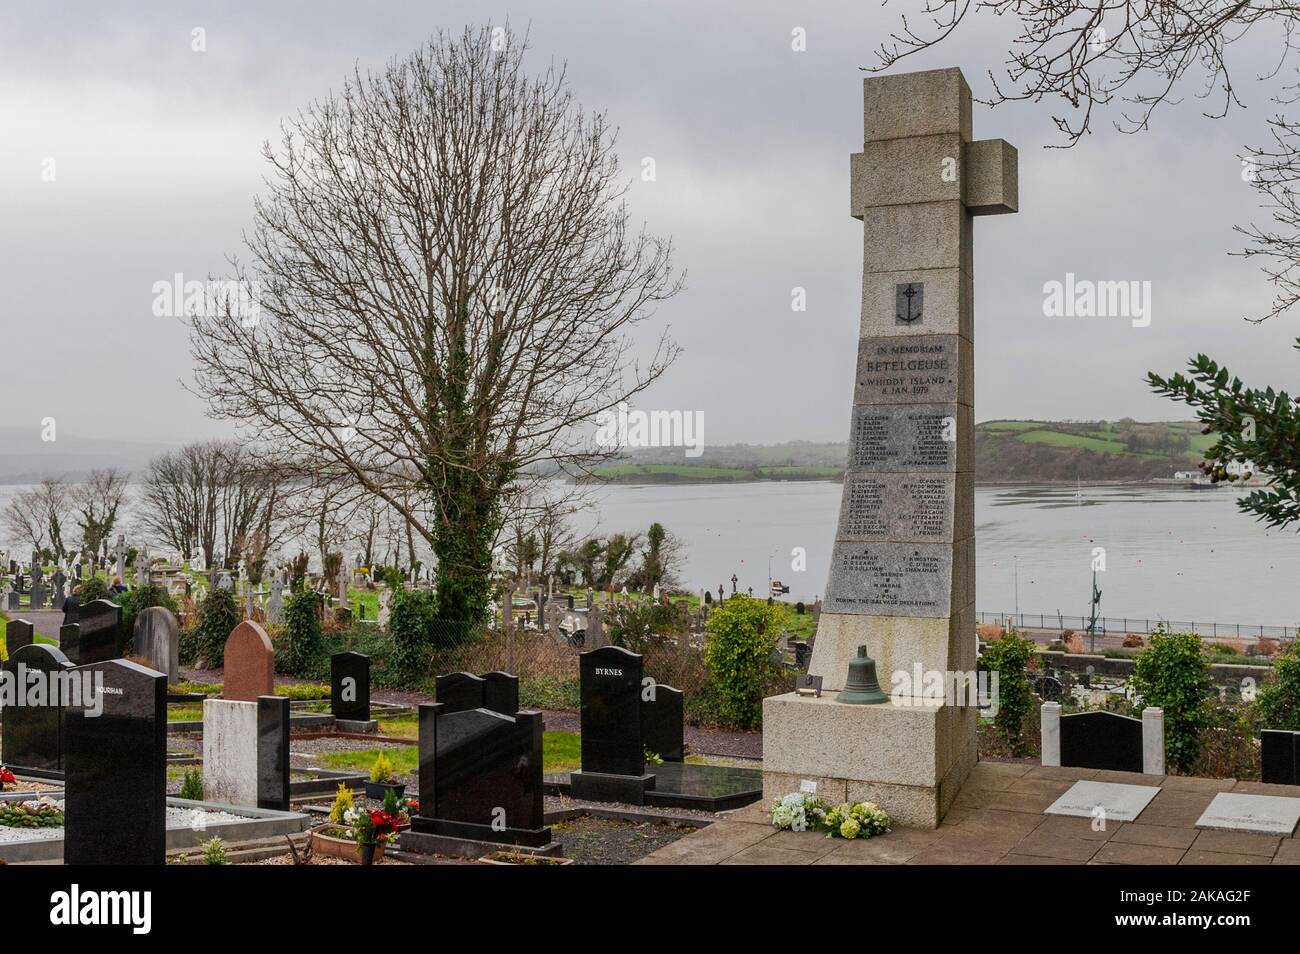 Bantry, West Cork, Ireland. 8th Jan, 2020. Today marks the 41st anniversary of the Whiddy Island disaster when the oil tanker Betelgeuse split in two and exploded causing the death of 50 workers in 1979.  Mary Doyle (Kingston) of Goleen lost her husband, Tim, on the night of the tragedy and came to the memorial today to lay wreaths.  it comes as Mary's son, Michael, who is a maritime lawyer, is in Dublin today handing a letter to the Garda Chief Superintendant regarding legal action against the Irish Government for shortcomings in the aftermath of the disaster.  Credit: AG News/Alamy Live News Stock Photo